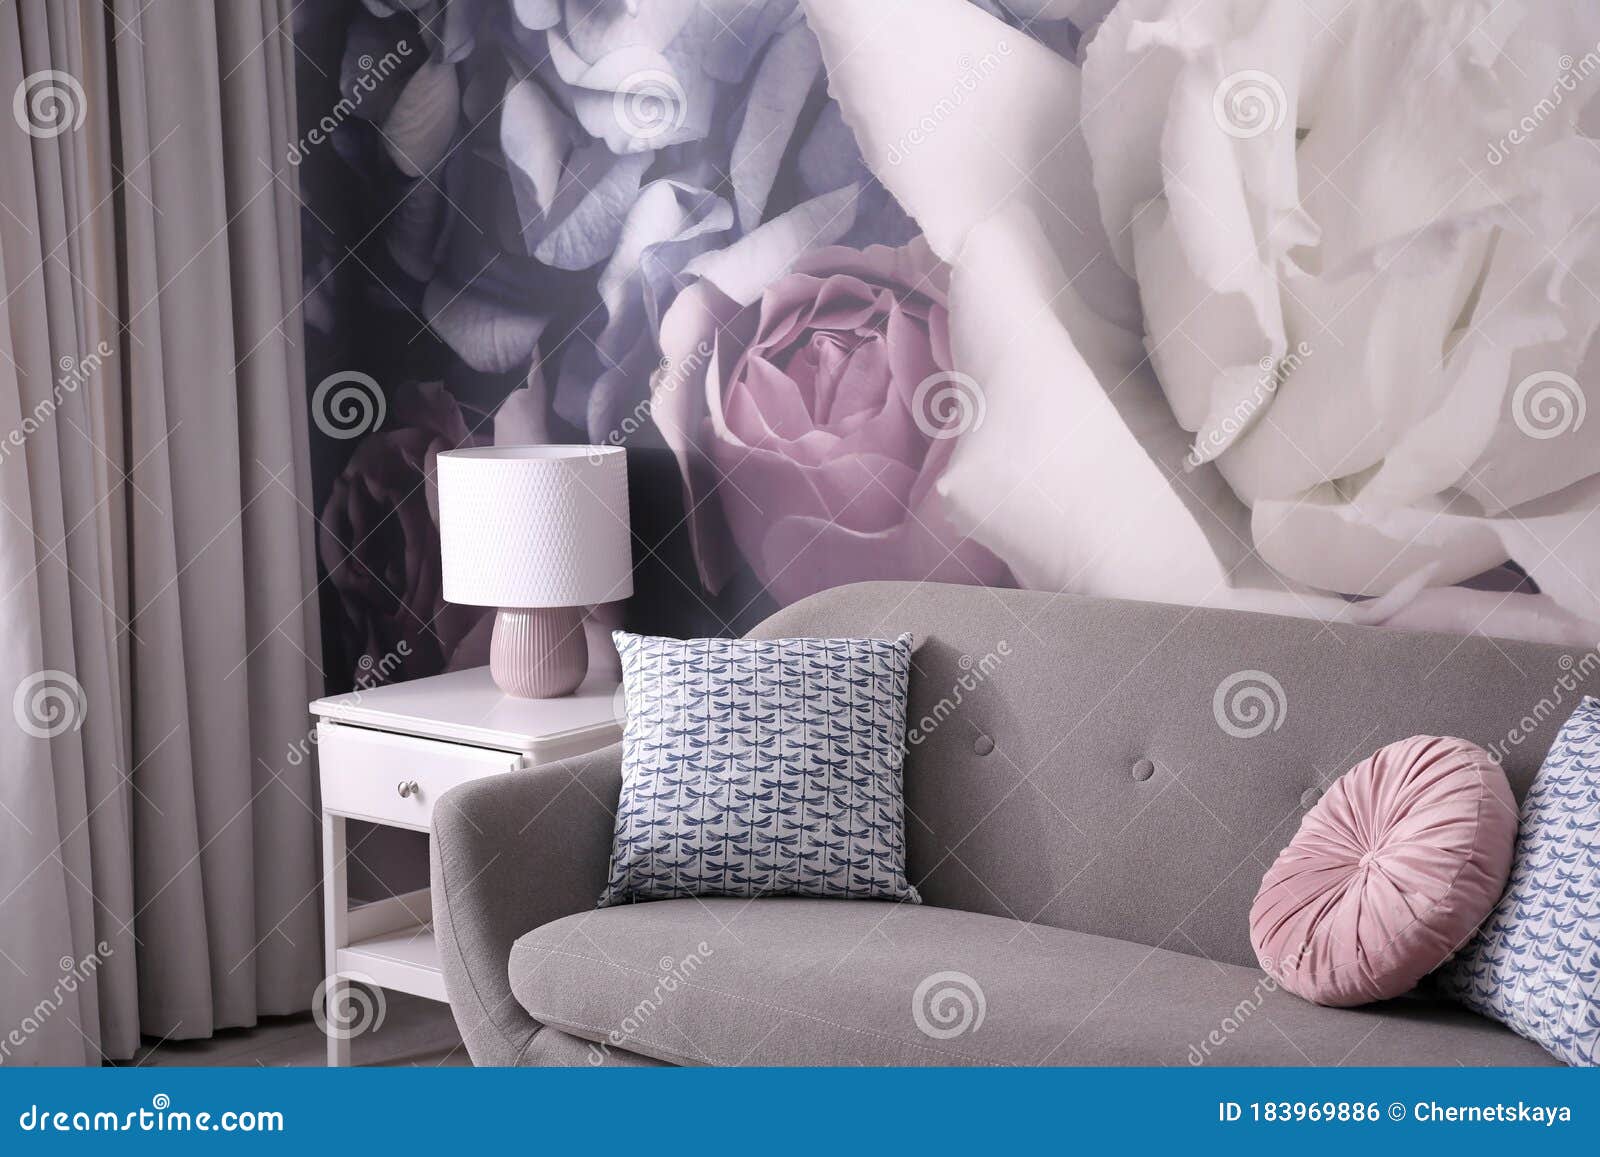 Sofa Near Wall With Floral Wallpaper. Stylish Living Room